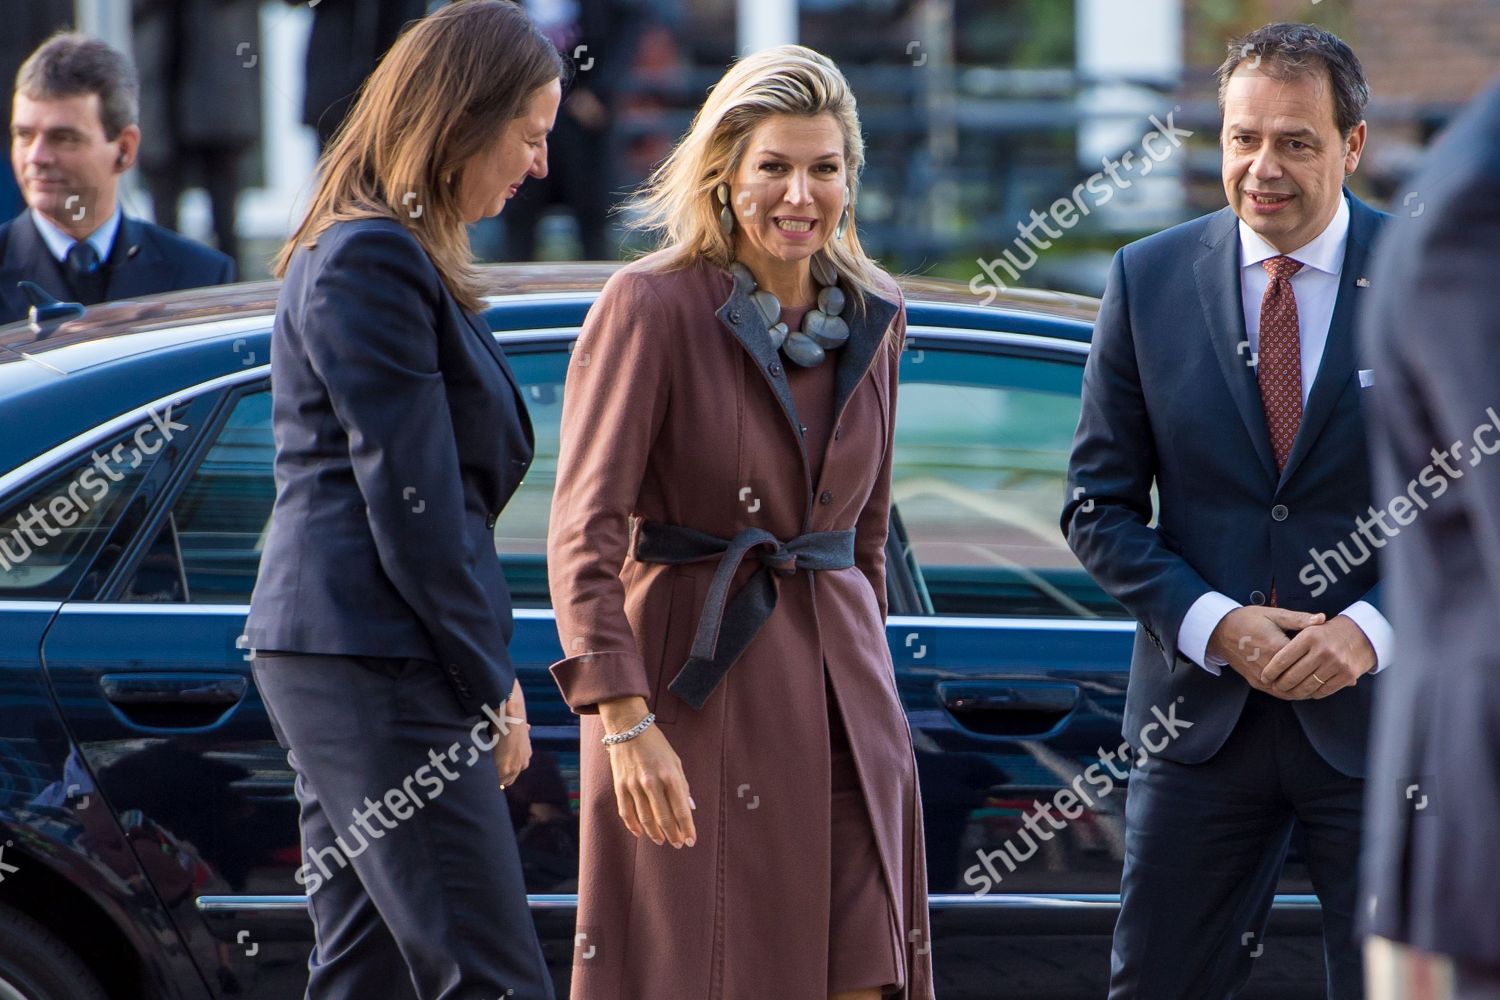 queen-maxima-visit-to-113-suicide-prevention-amsterdam-the-netherlands-shutterstock-editorial-9958871b.jpg